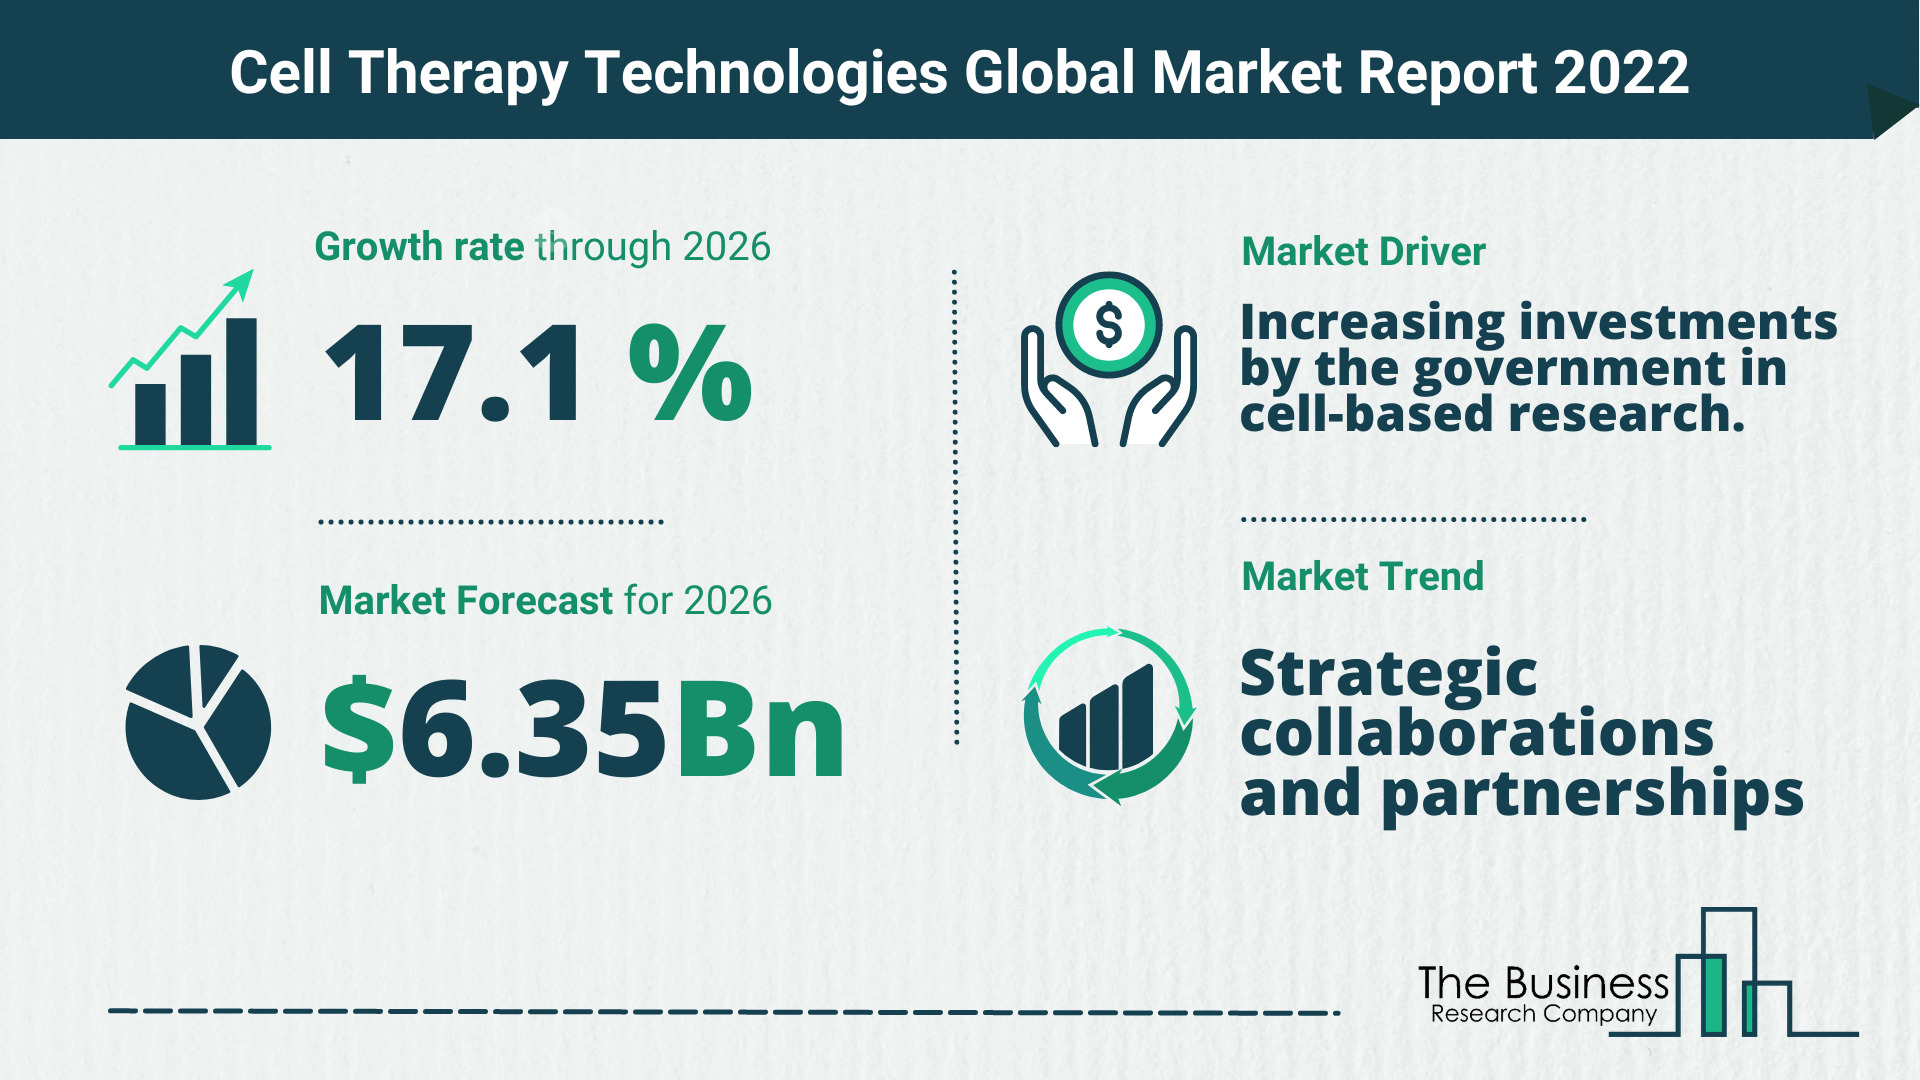 Latest Cell Therapy Technologies Market Growth Study 2022-2026 By The Business Research Company